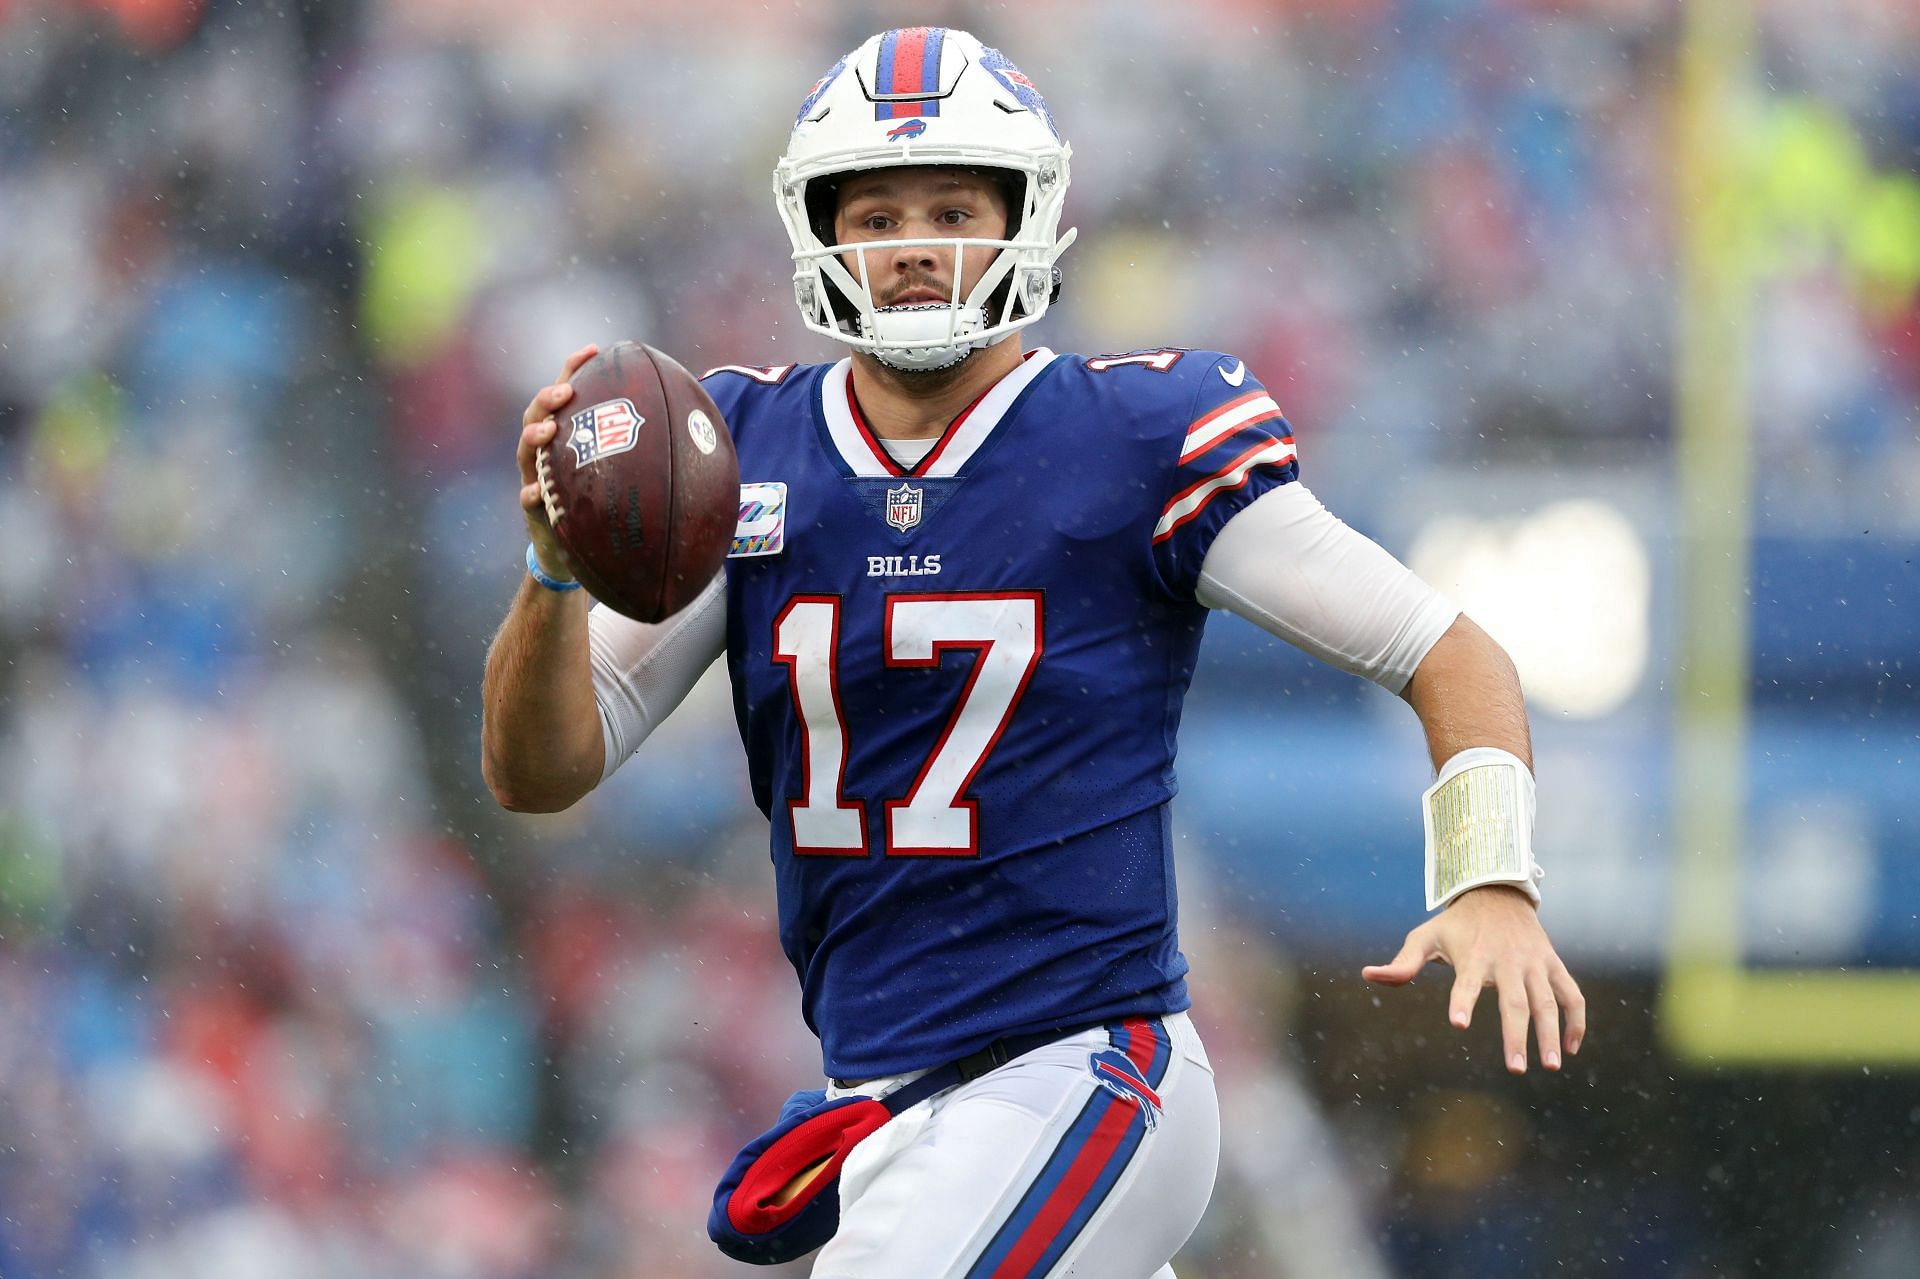 The Buffalo Bills quarterback took some time off as the season approaches.